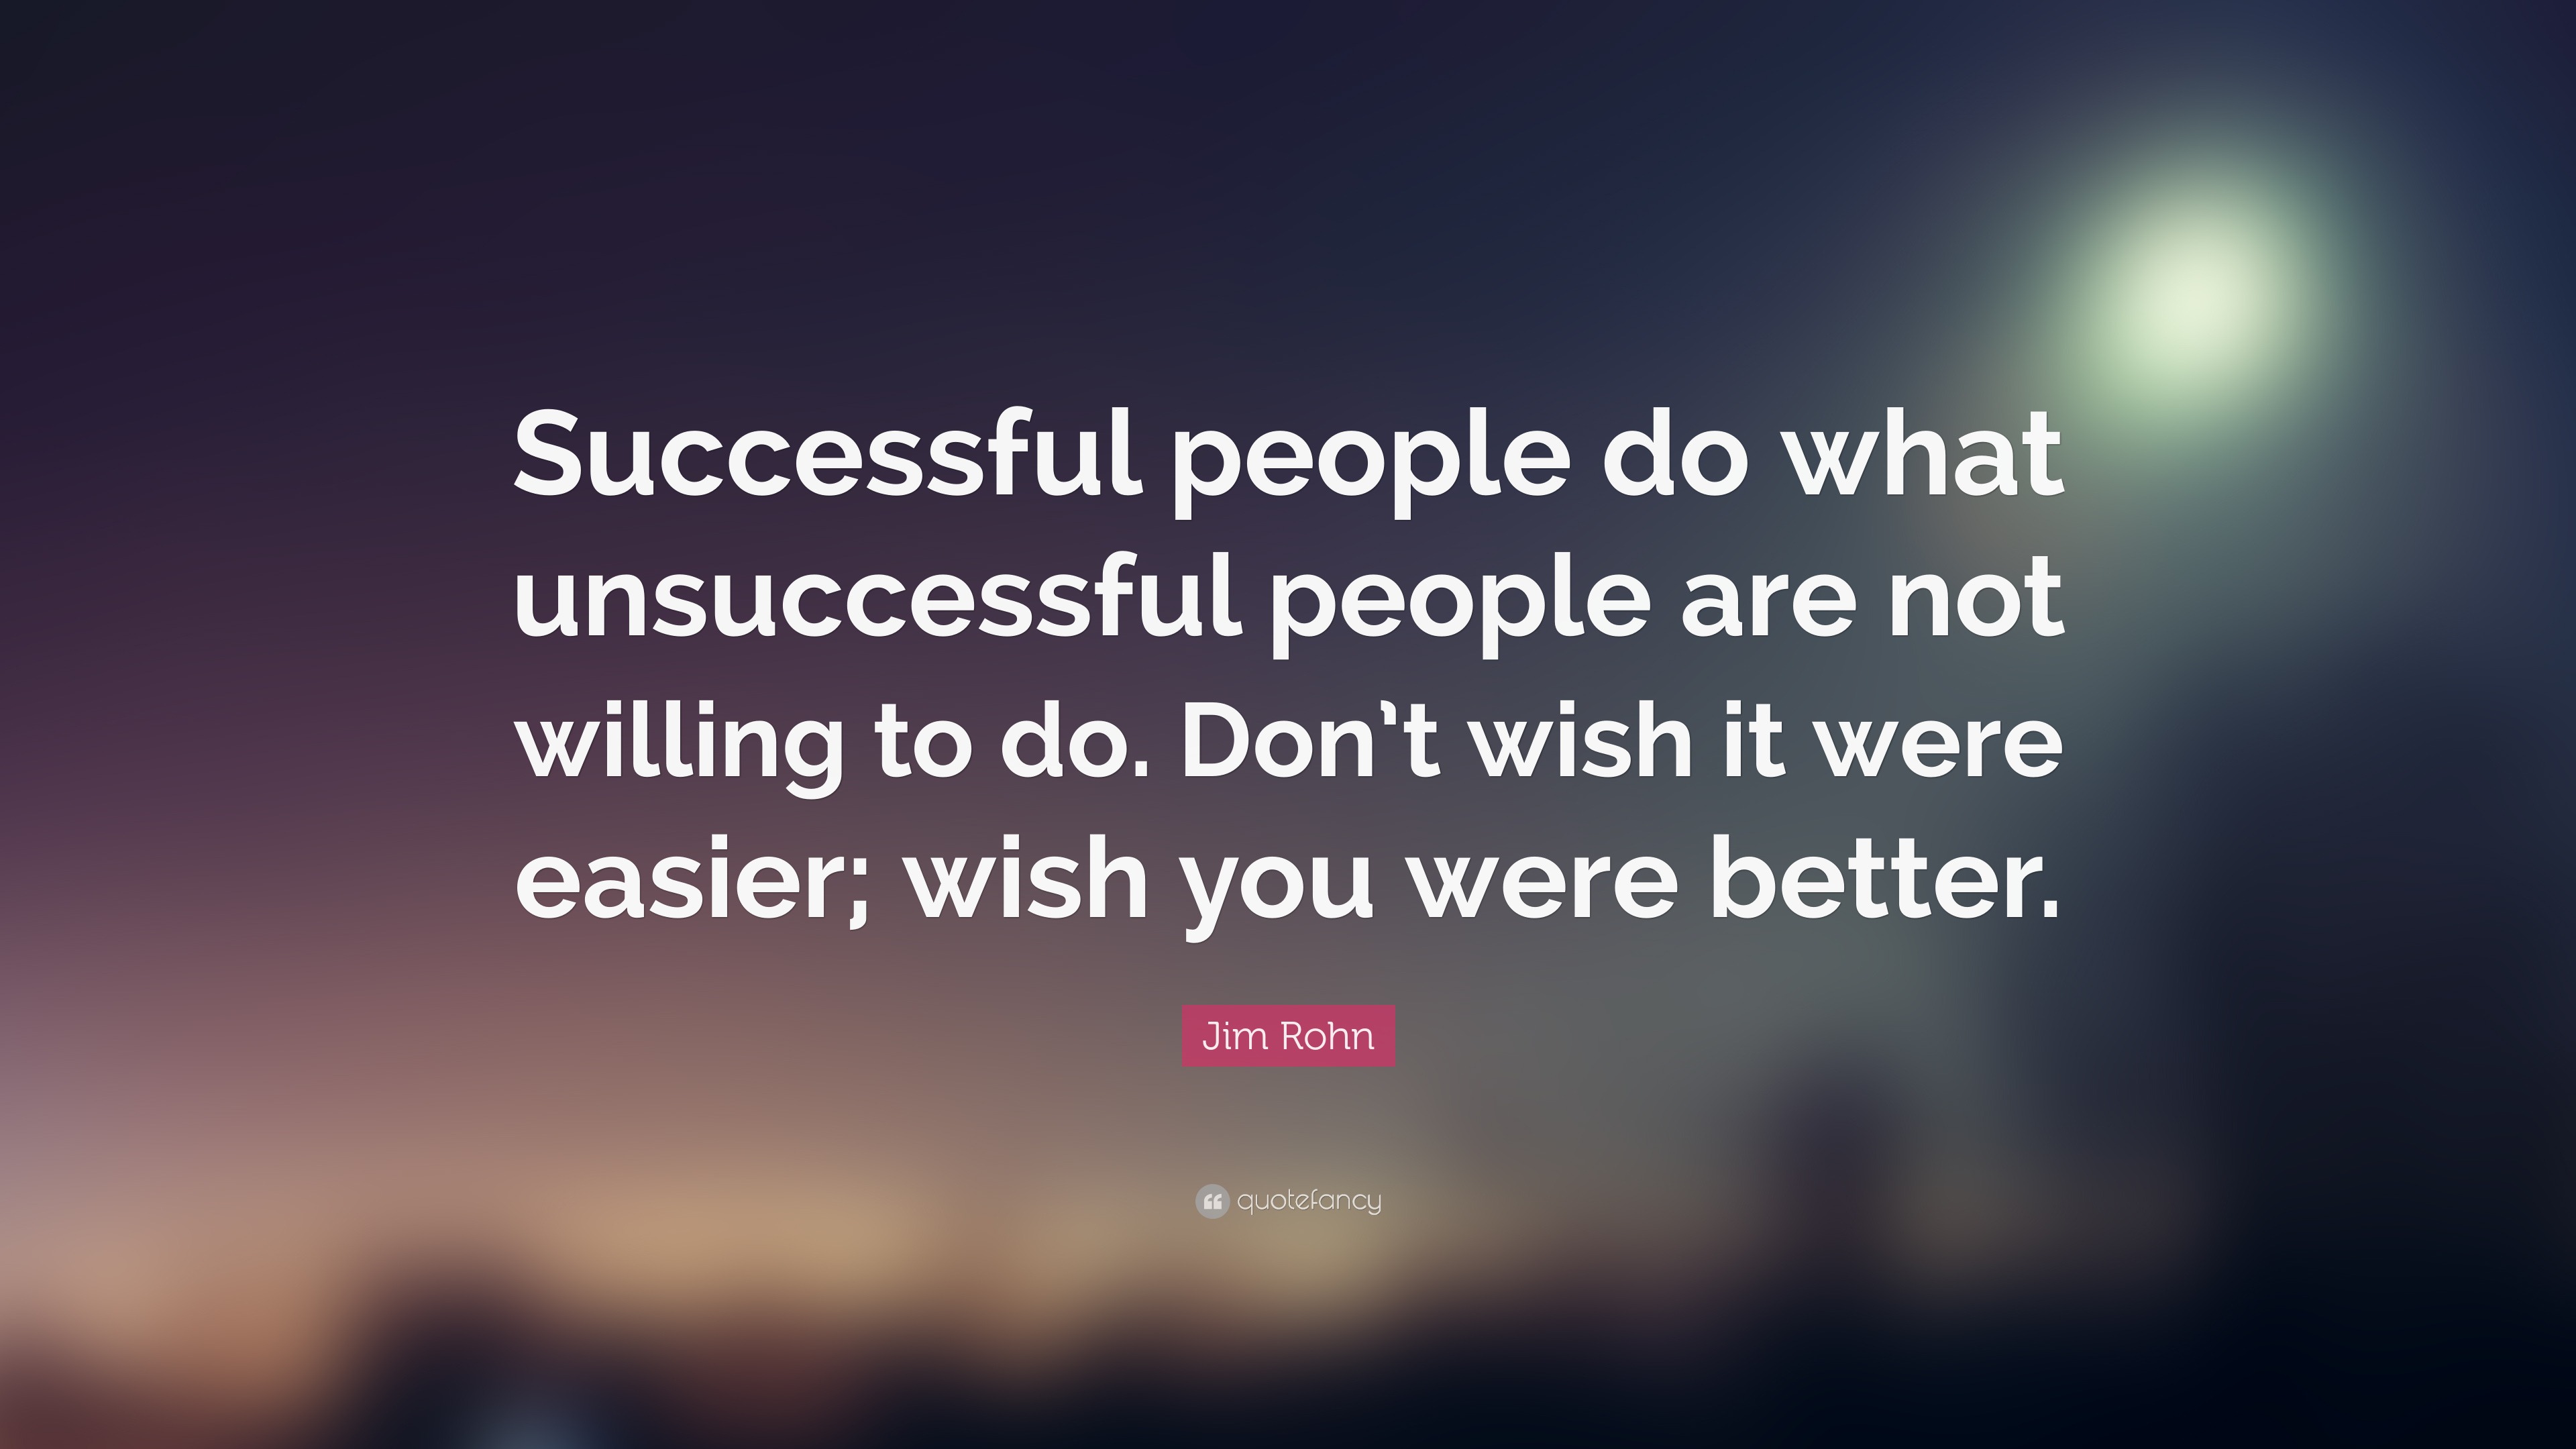 Jim Rohn Quote: “Successful people do what unsuccessful people are not ...